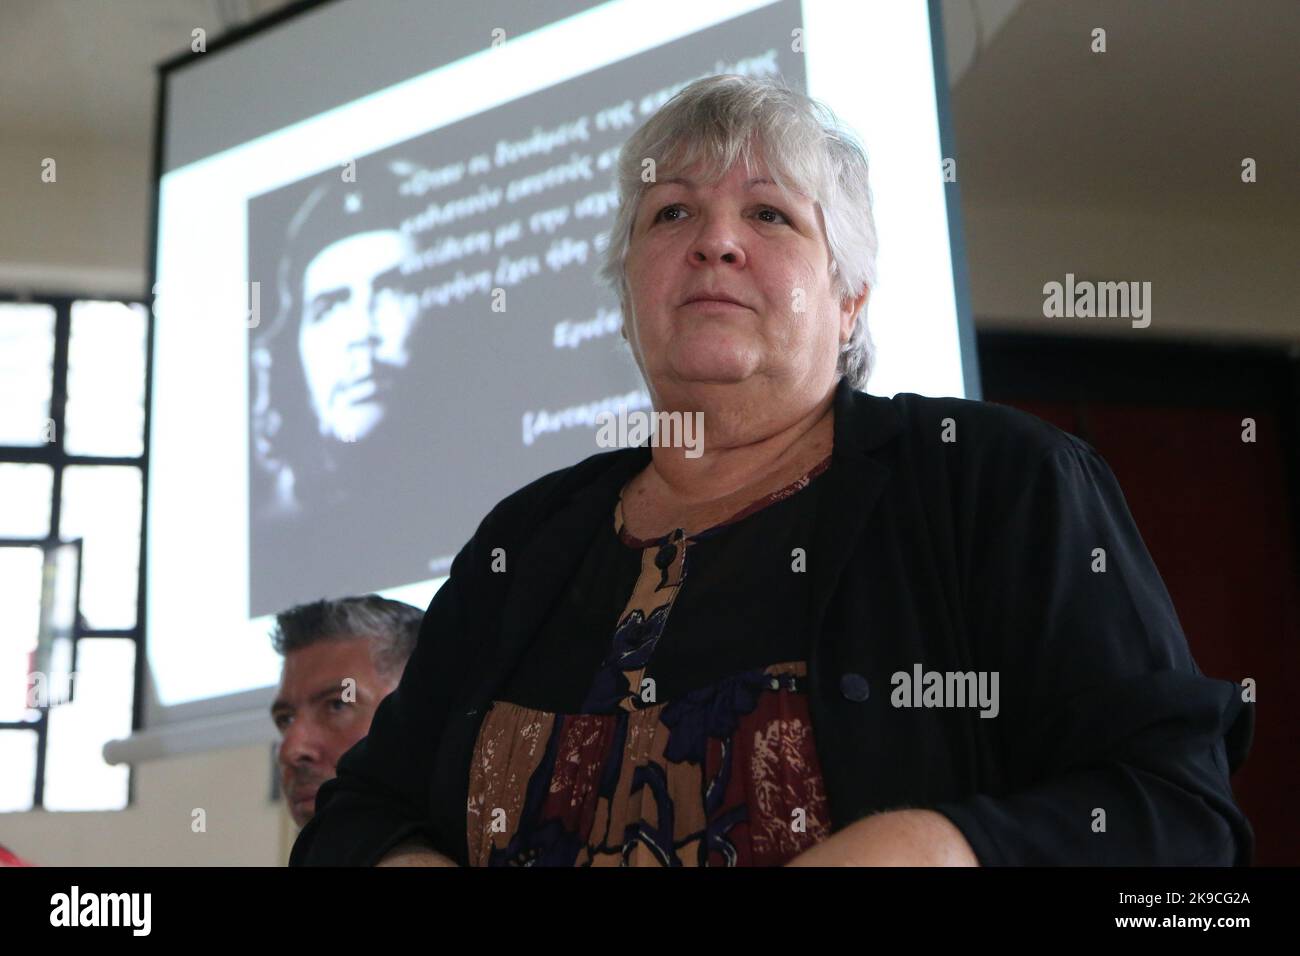 Aleida Guevara March, eldest daughter of legendary Argentinian guerrilla leader Ernesto Che Guevara, speaks at a function for 55 th anniversary of his death in high school in Athens. Stock Photo